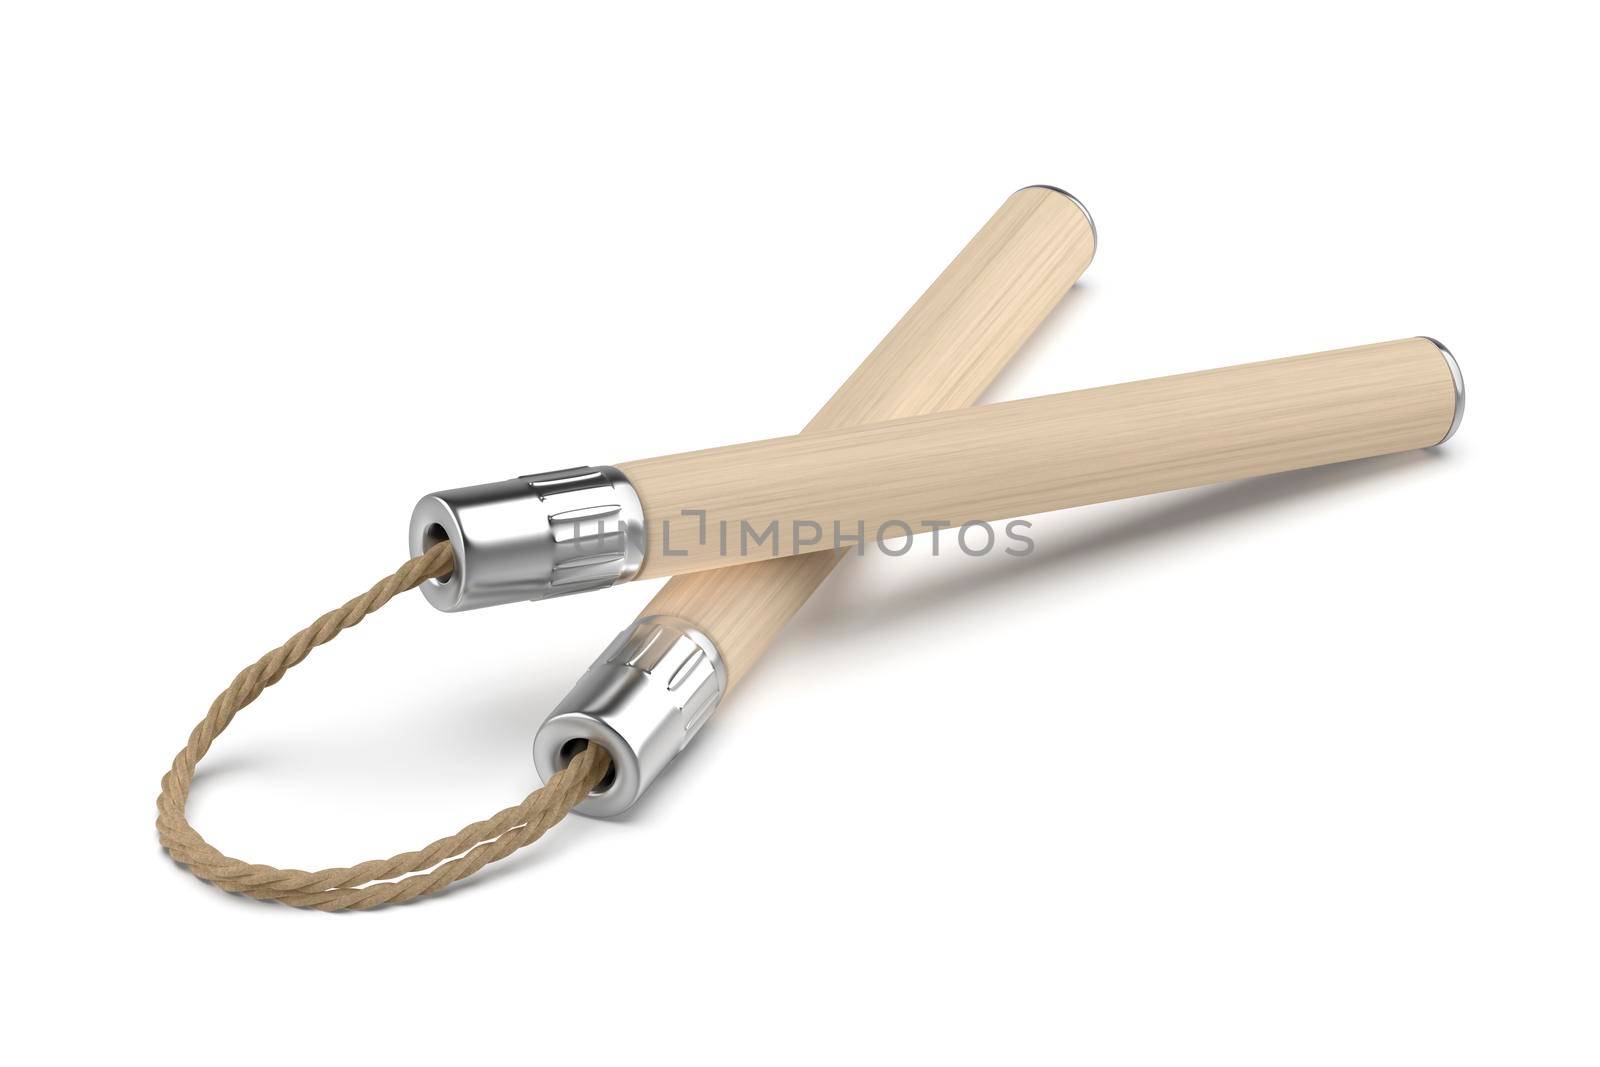 Wooden nunchaku with cord on white background